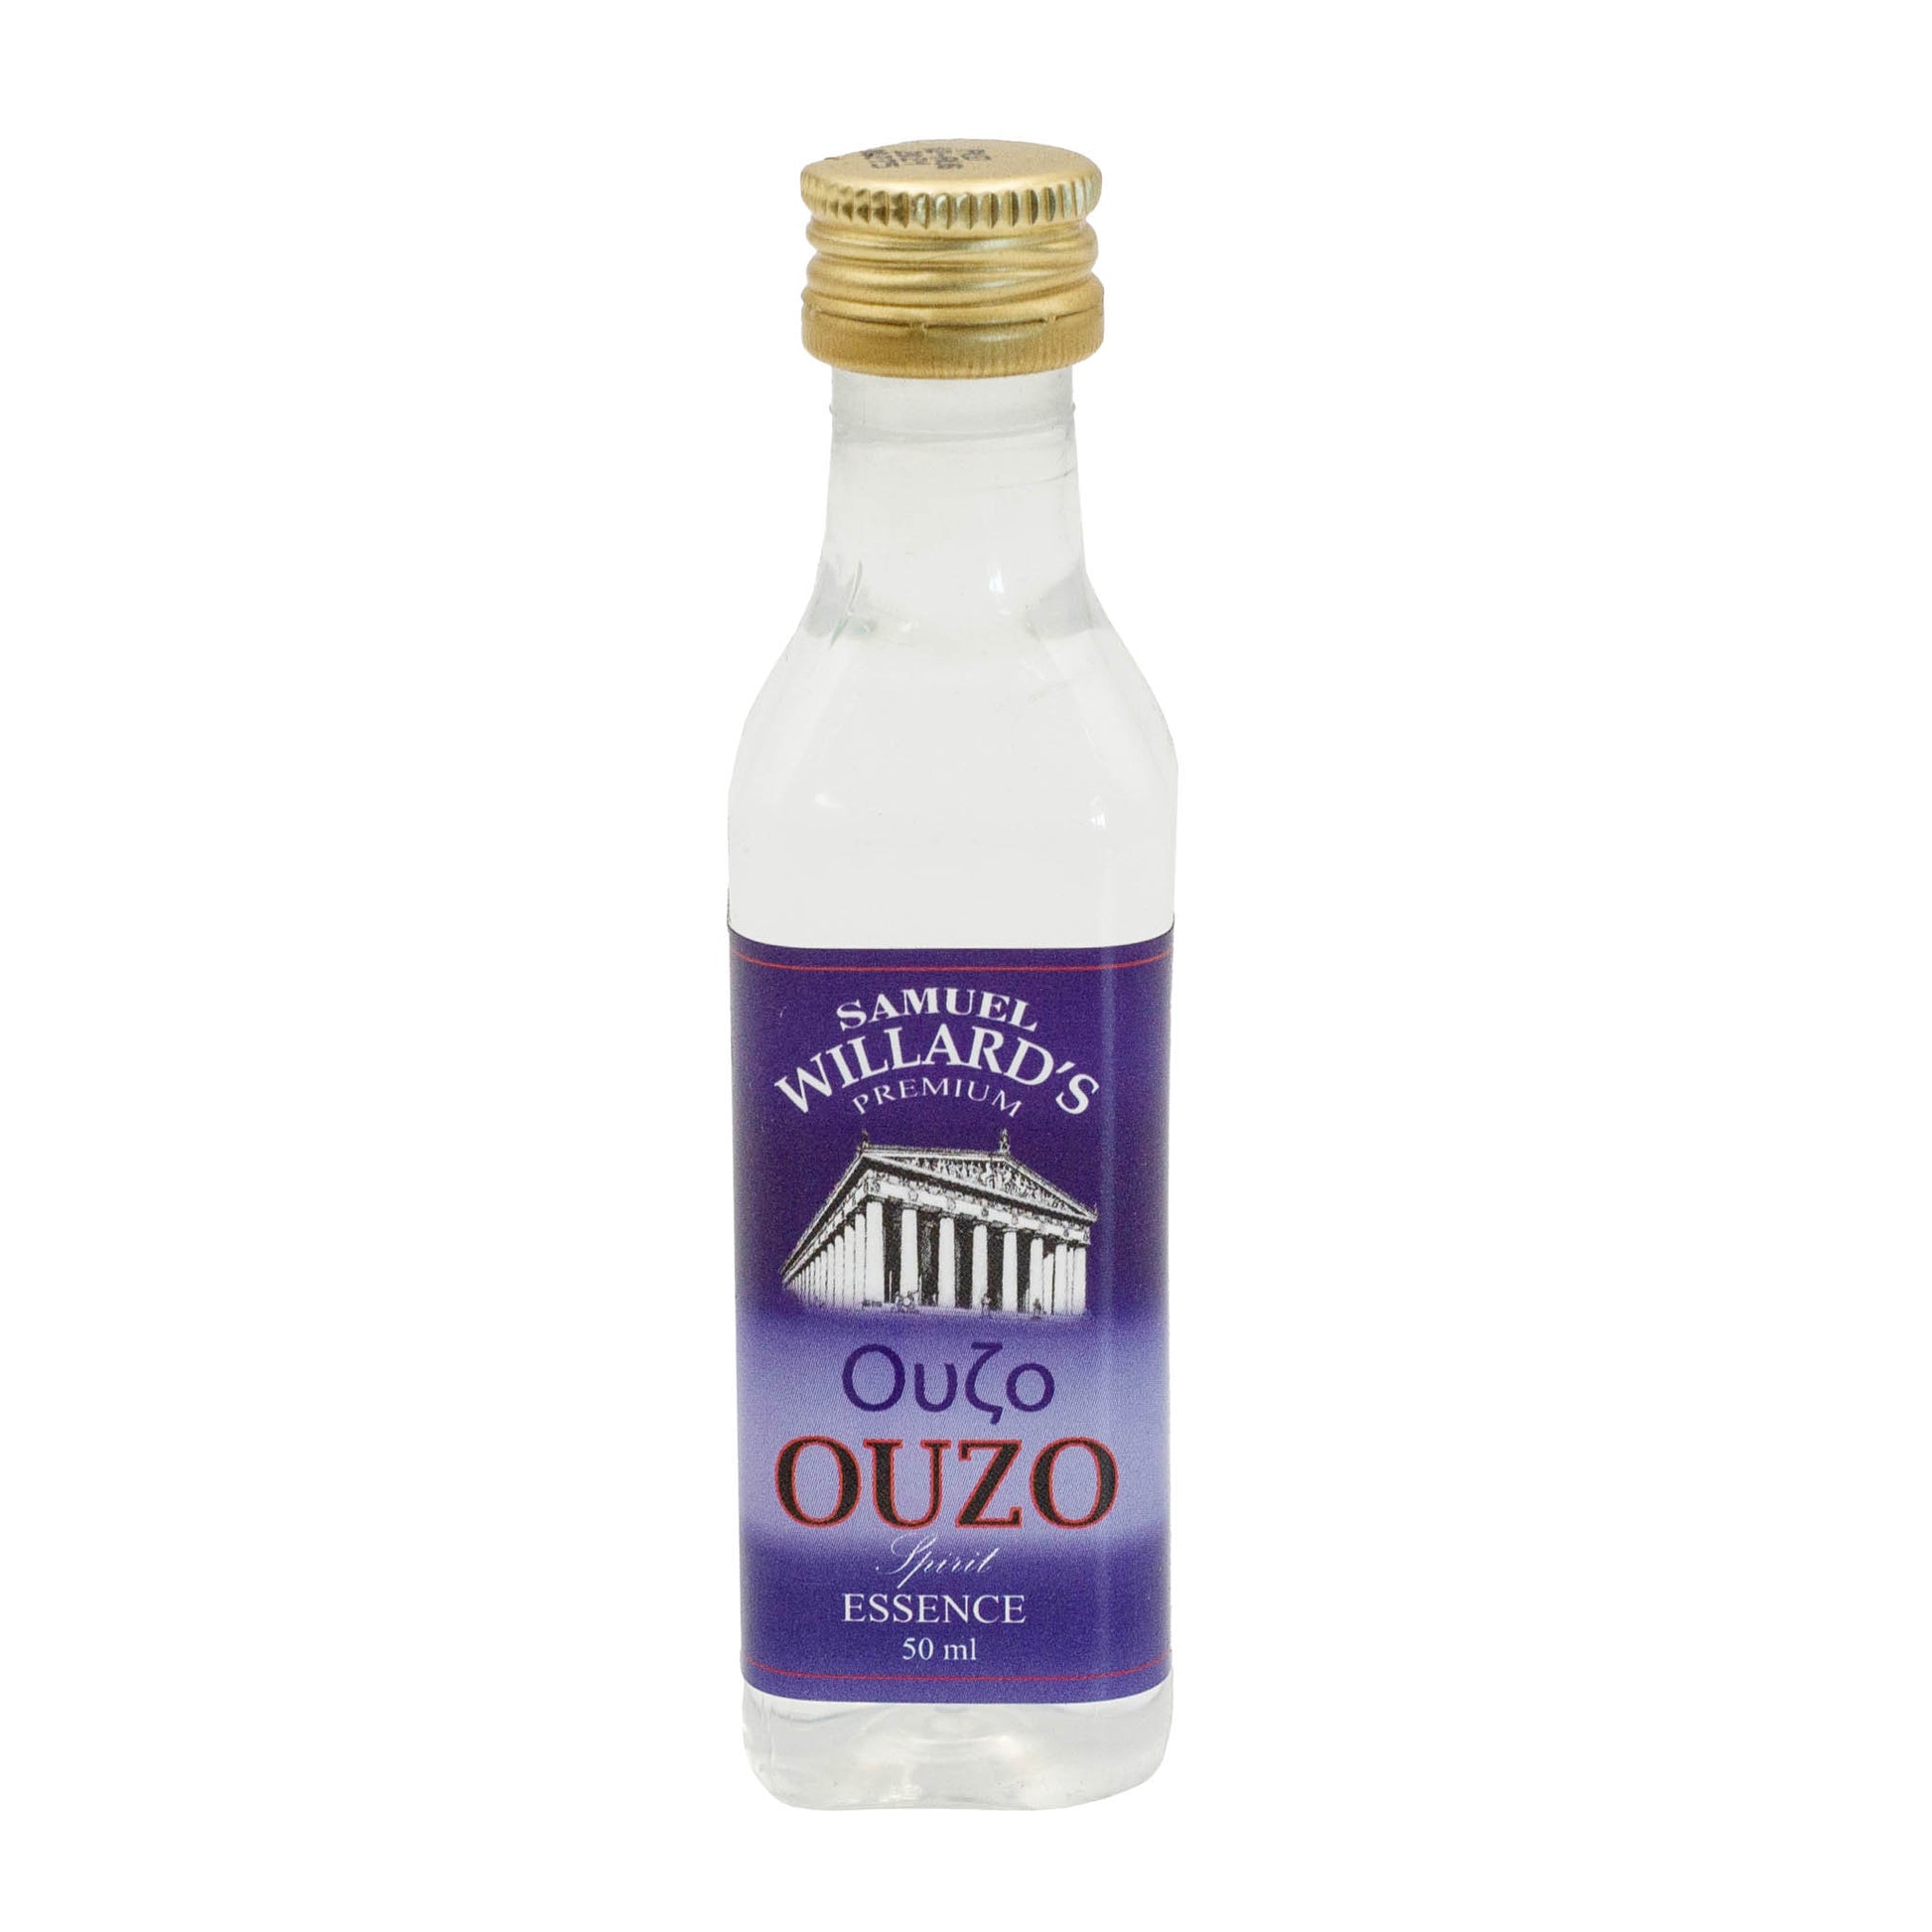 Samuel Willards Ouzo essence makes a Pepe Lopez style drink. Will make 1125ml of finished product from each 50ml bottle